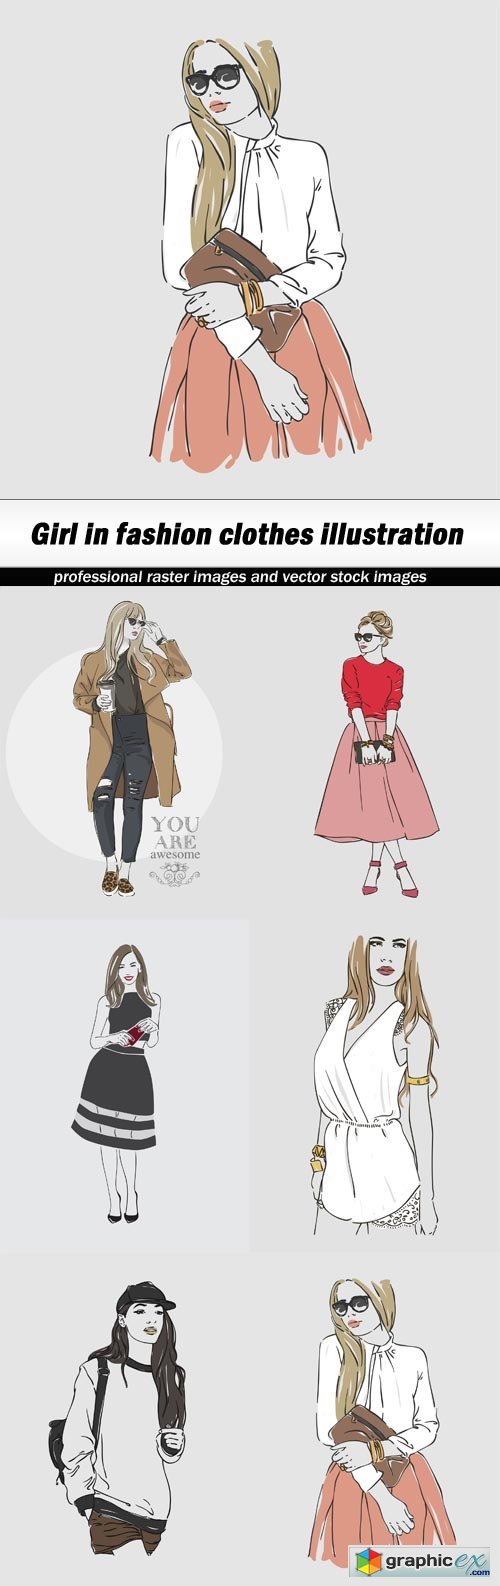 Girl in fashion clothes illustration